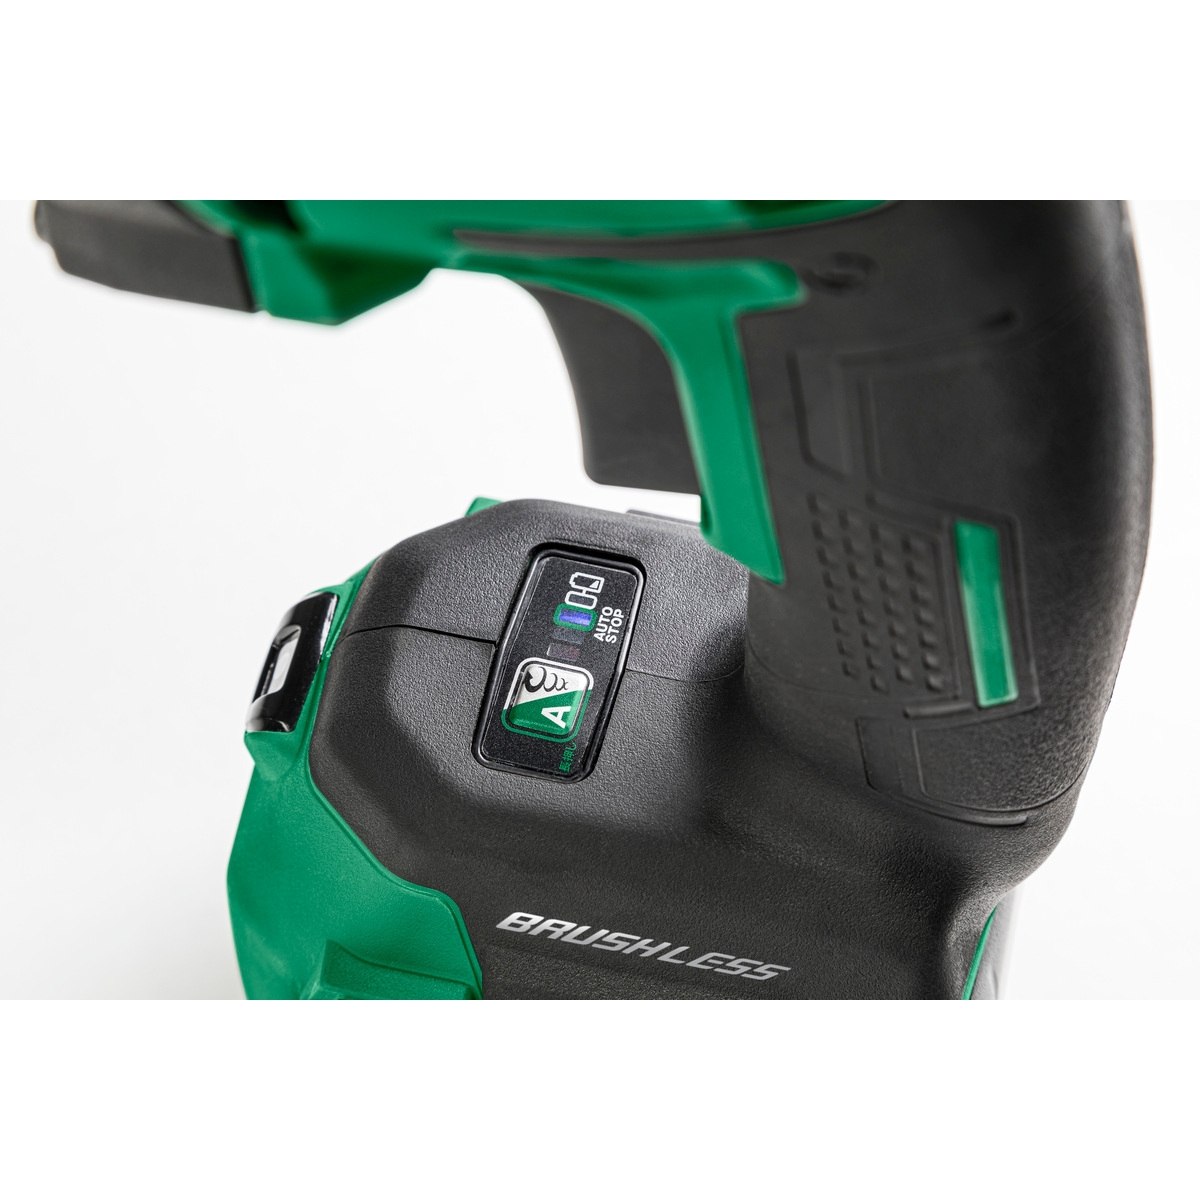 Cordless rotary hammers SDS-Plus DH18DPB